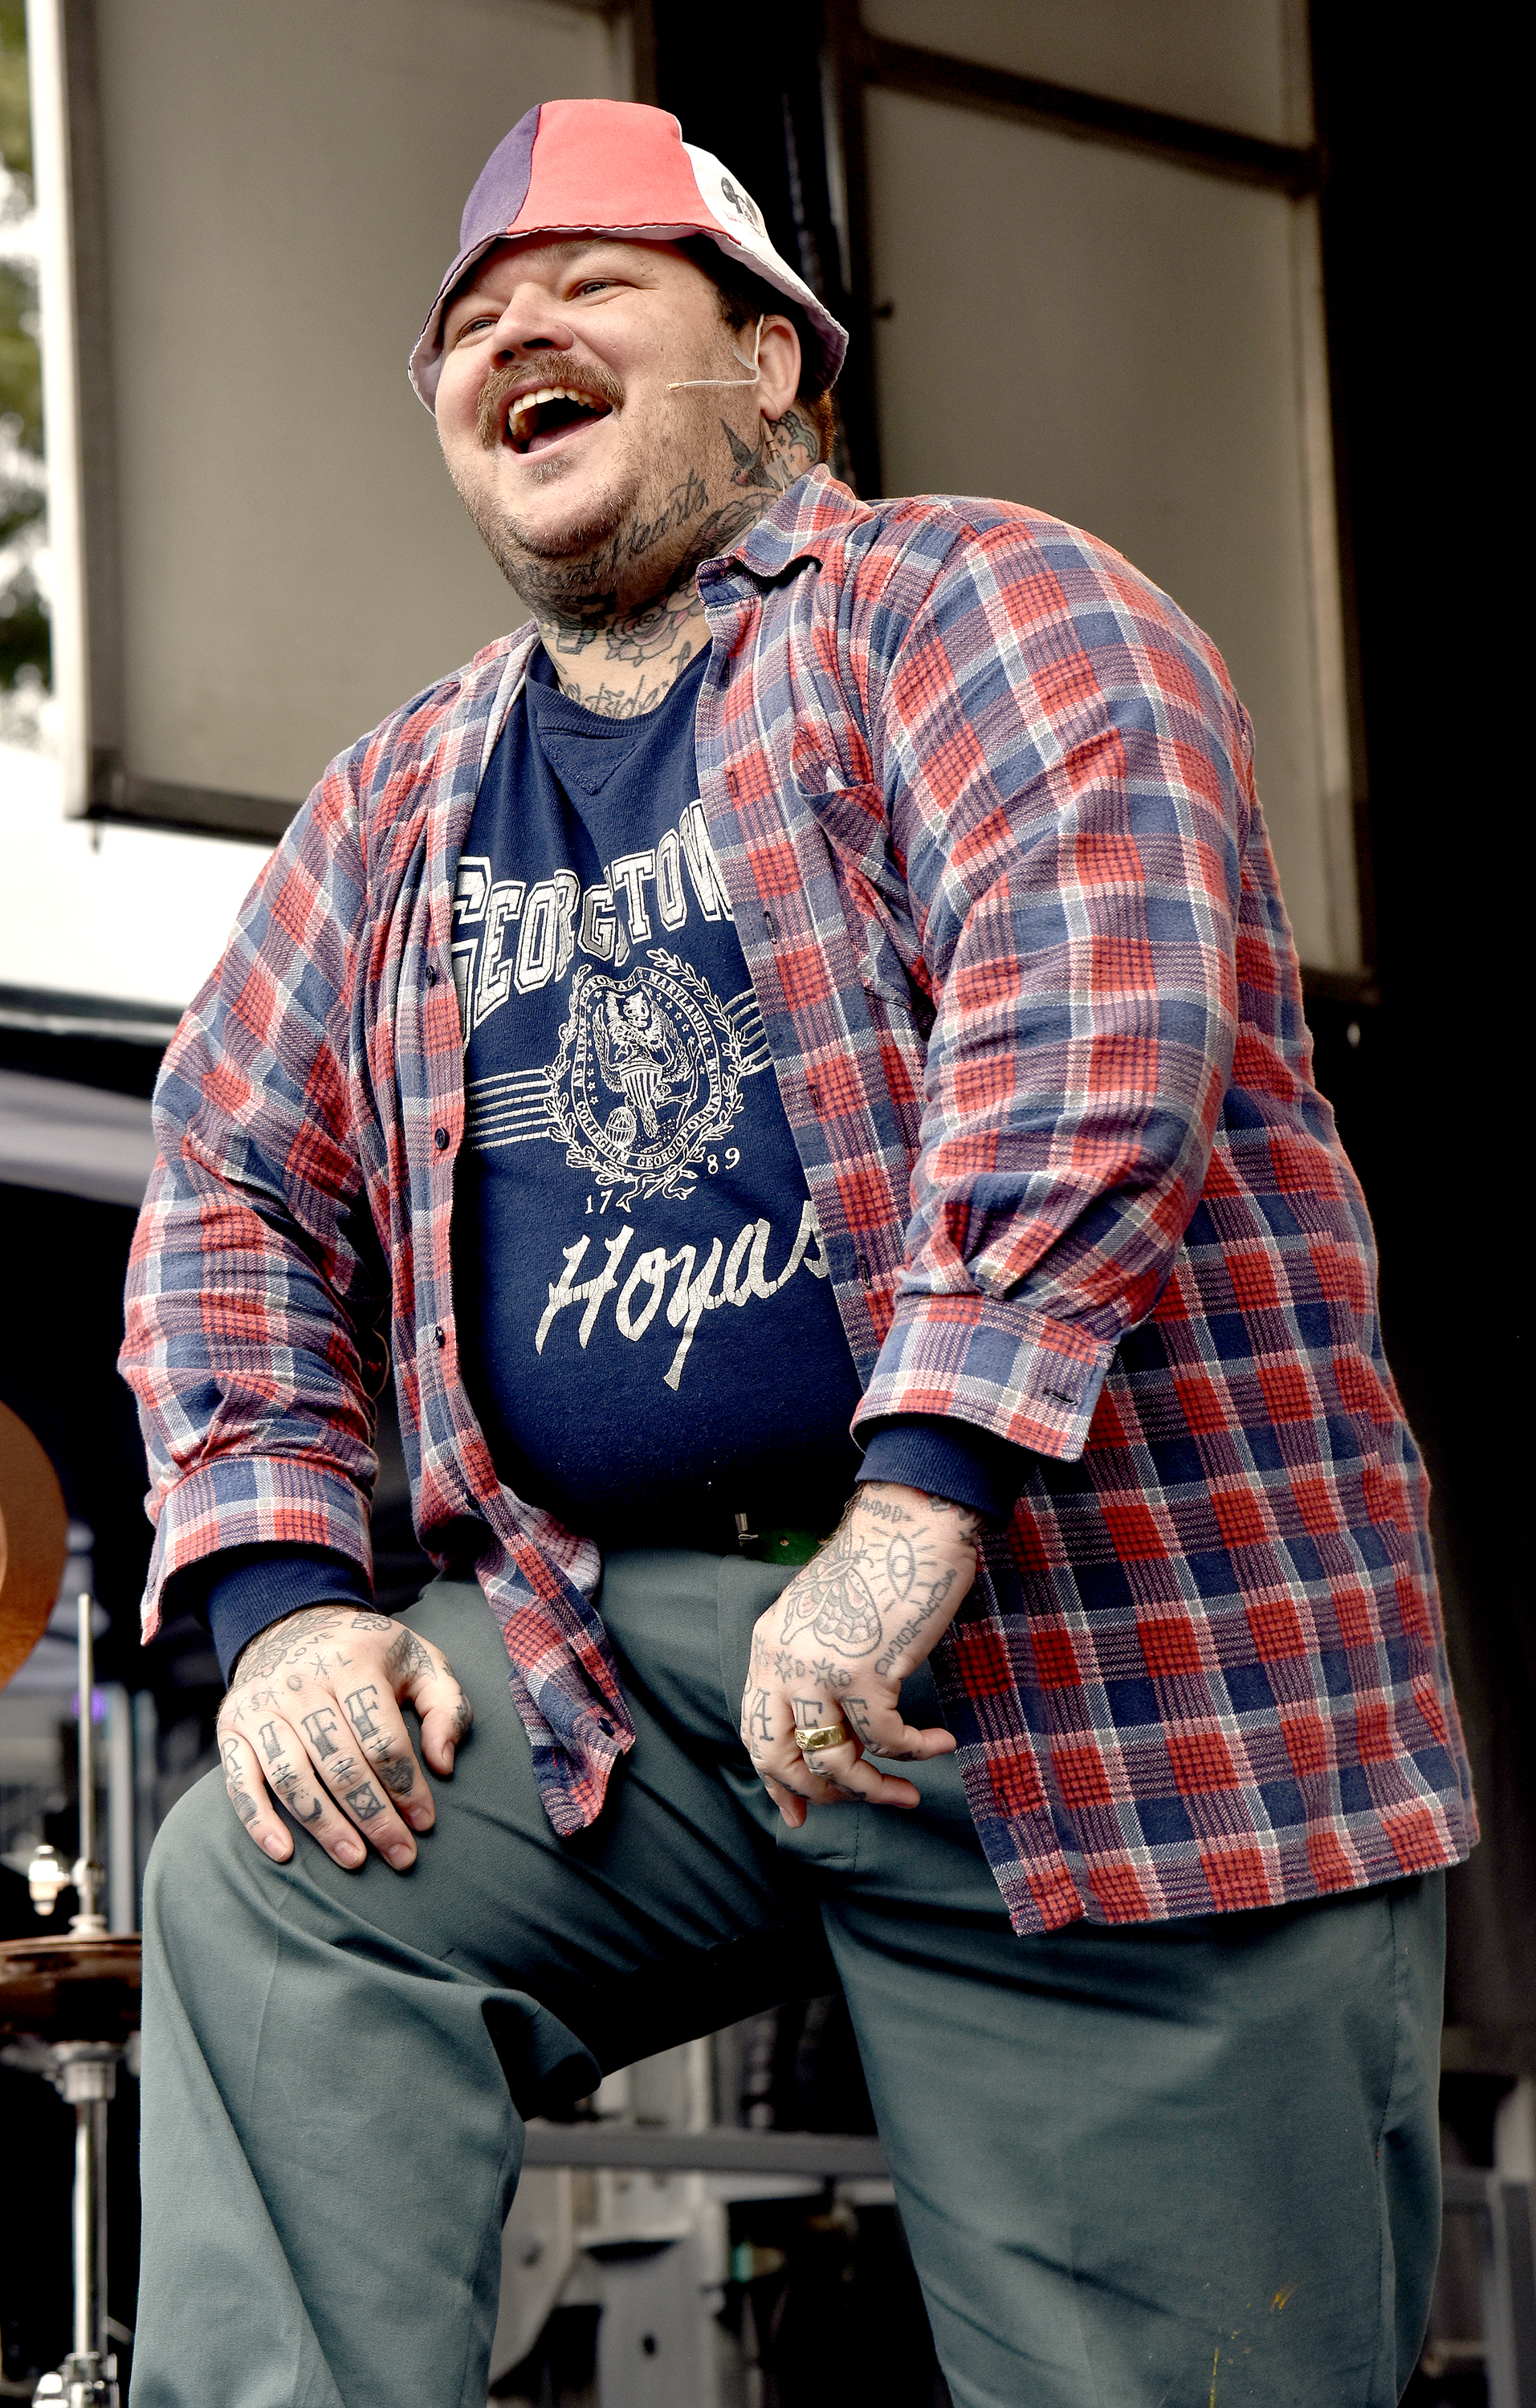 A heavily tattooed Matty Matheson at a cooking demonstration wearing a Georgetown Hoyas t-shirt, a plaid shirt over that, and pants. He&#x27;s also wearing a bucket hat